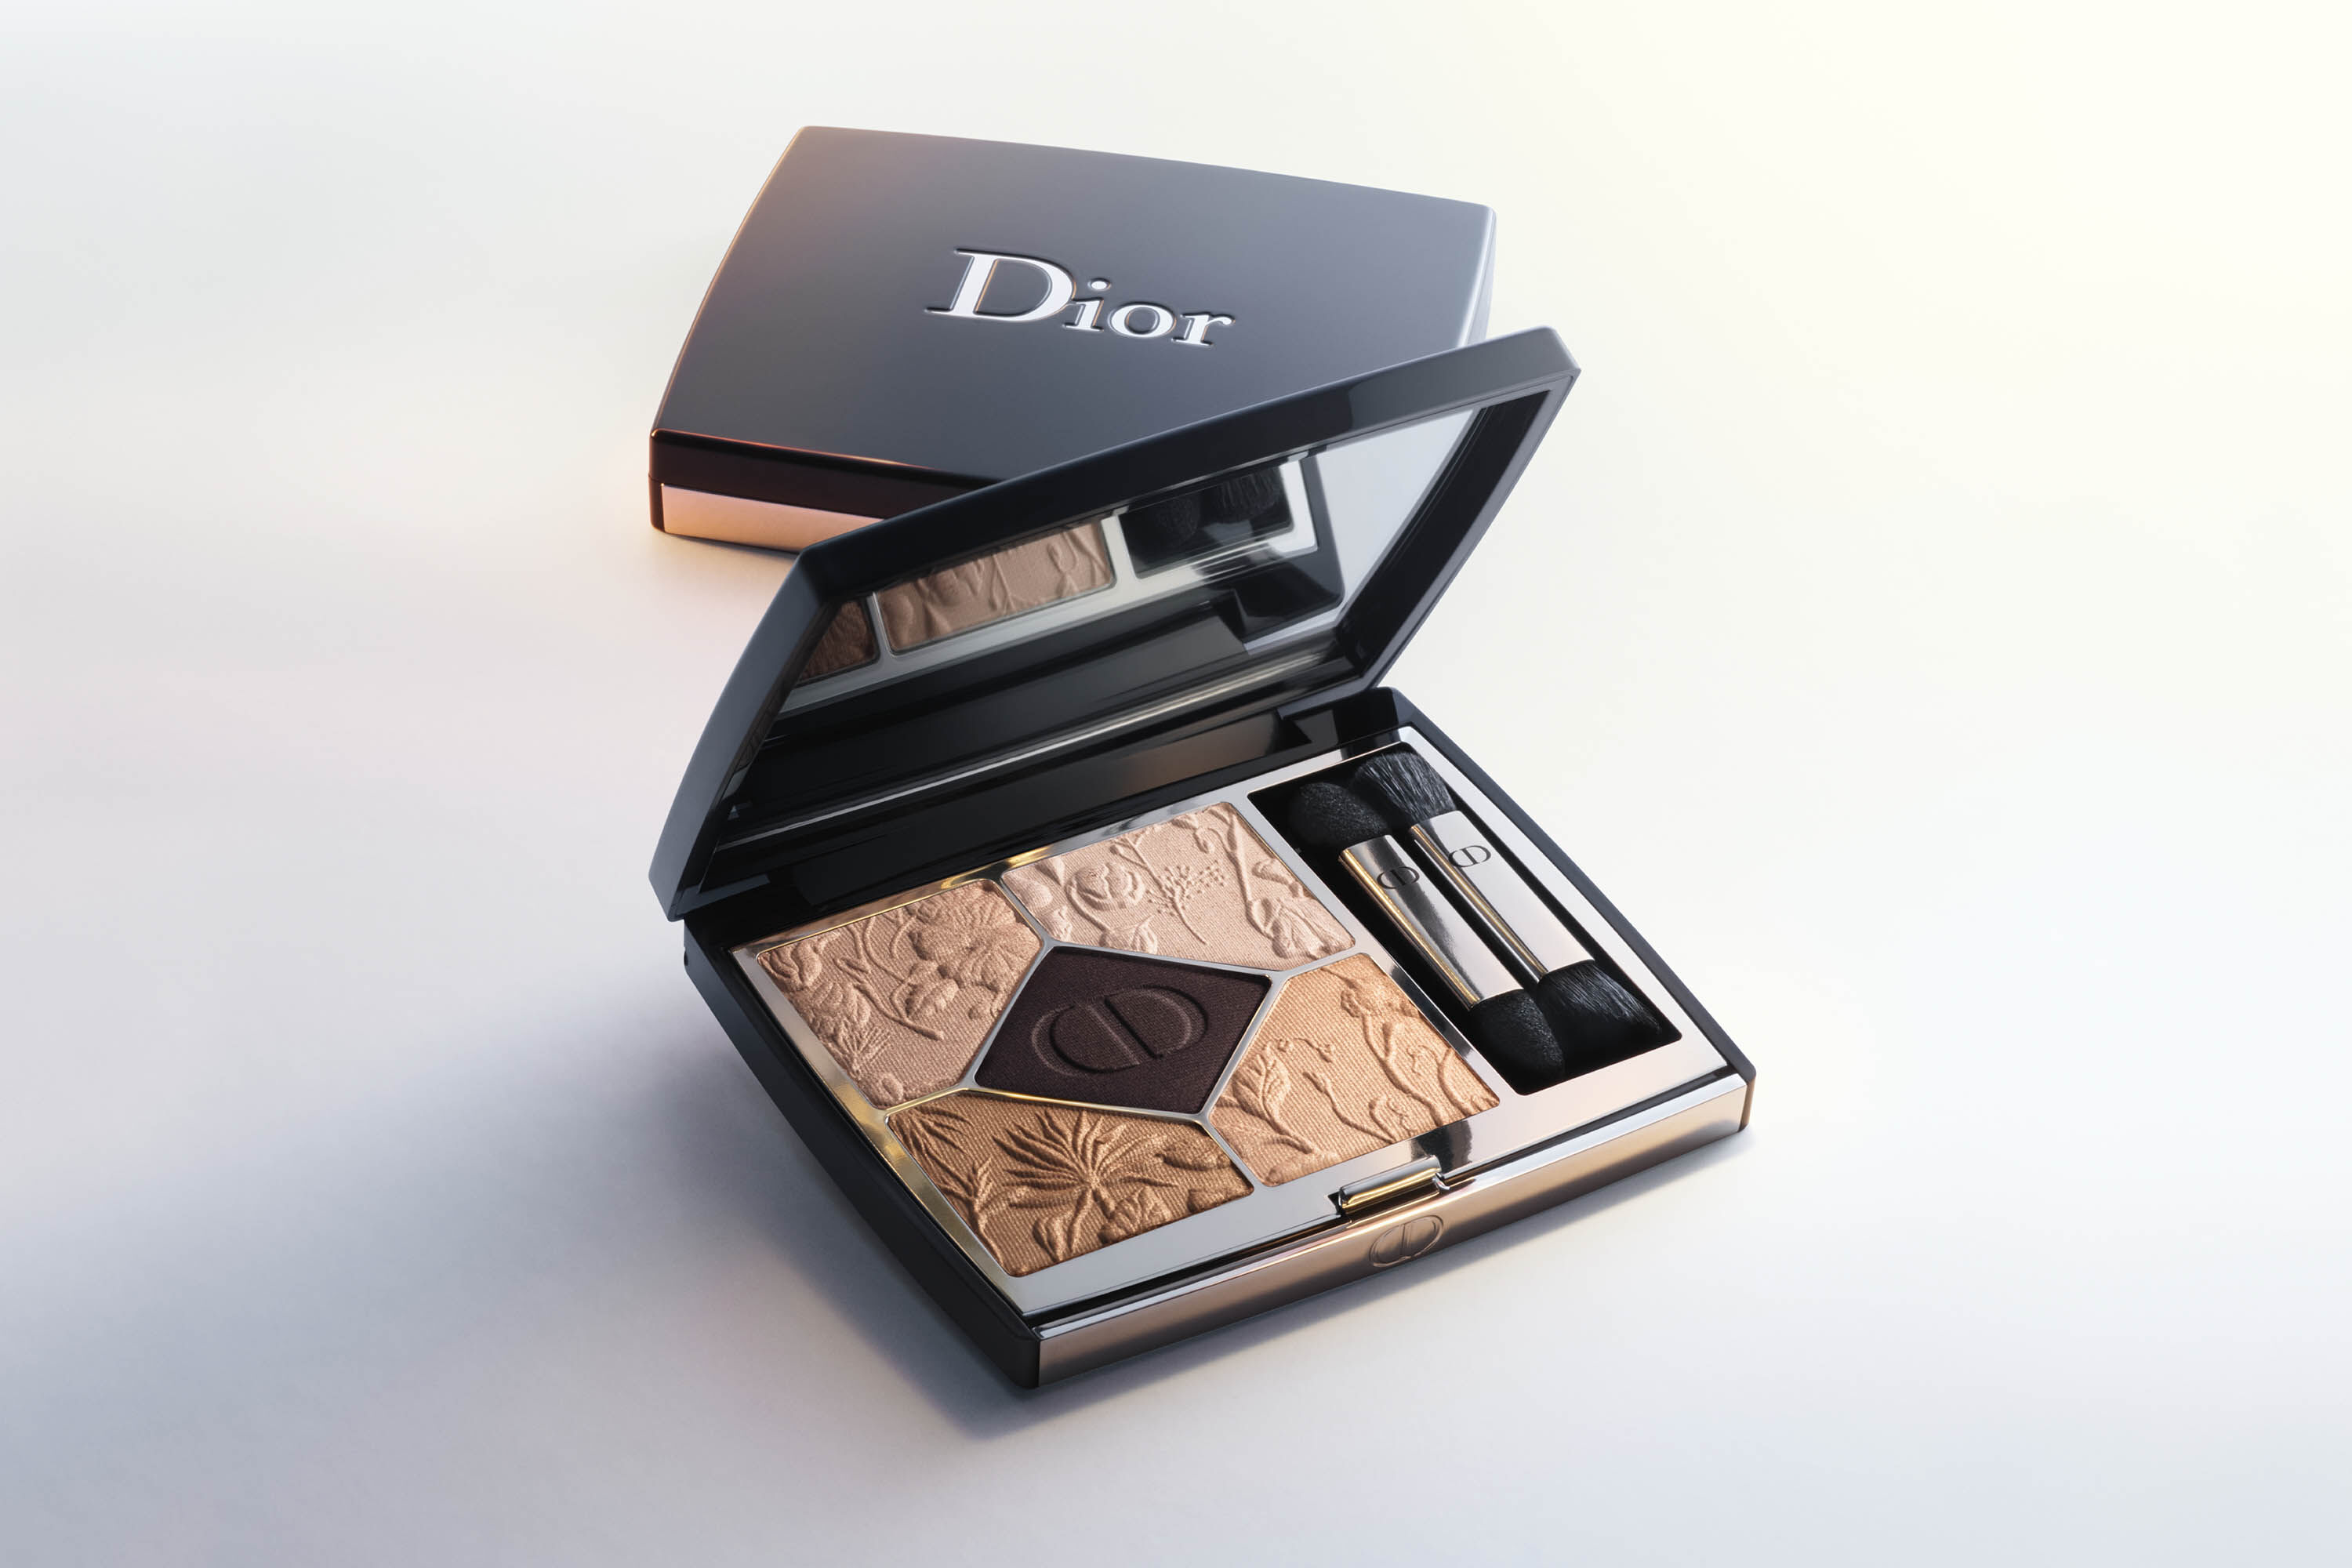 Zoom view - Image 2 - Dior - 5 Couleurs Couture - Limited Edition Eye palette - 5 eyeshadows - floral pattern - high color - creamy texture - 2